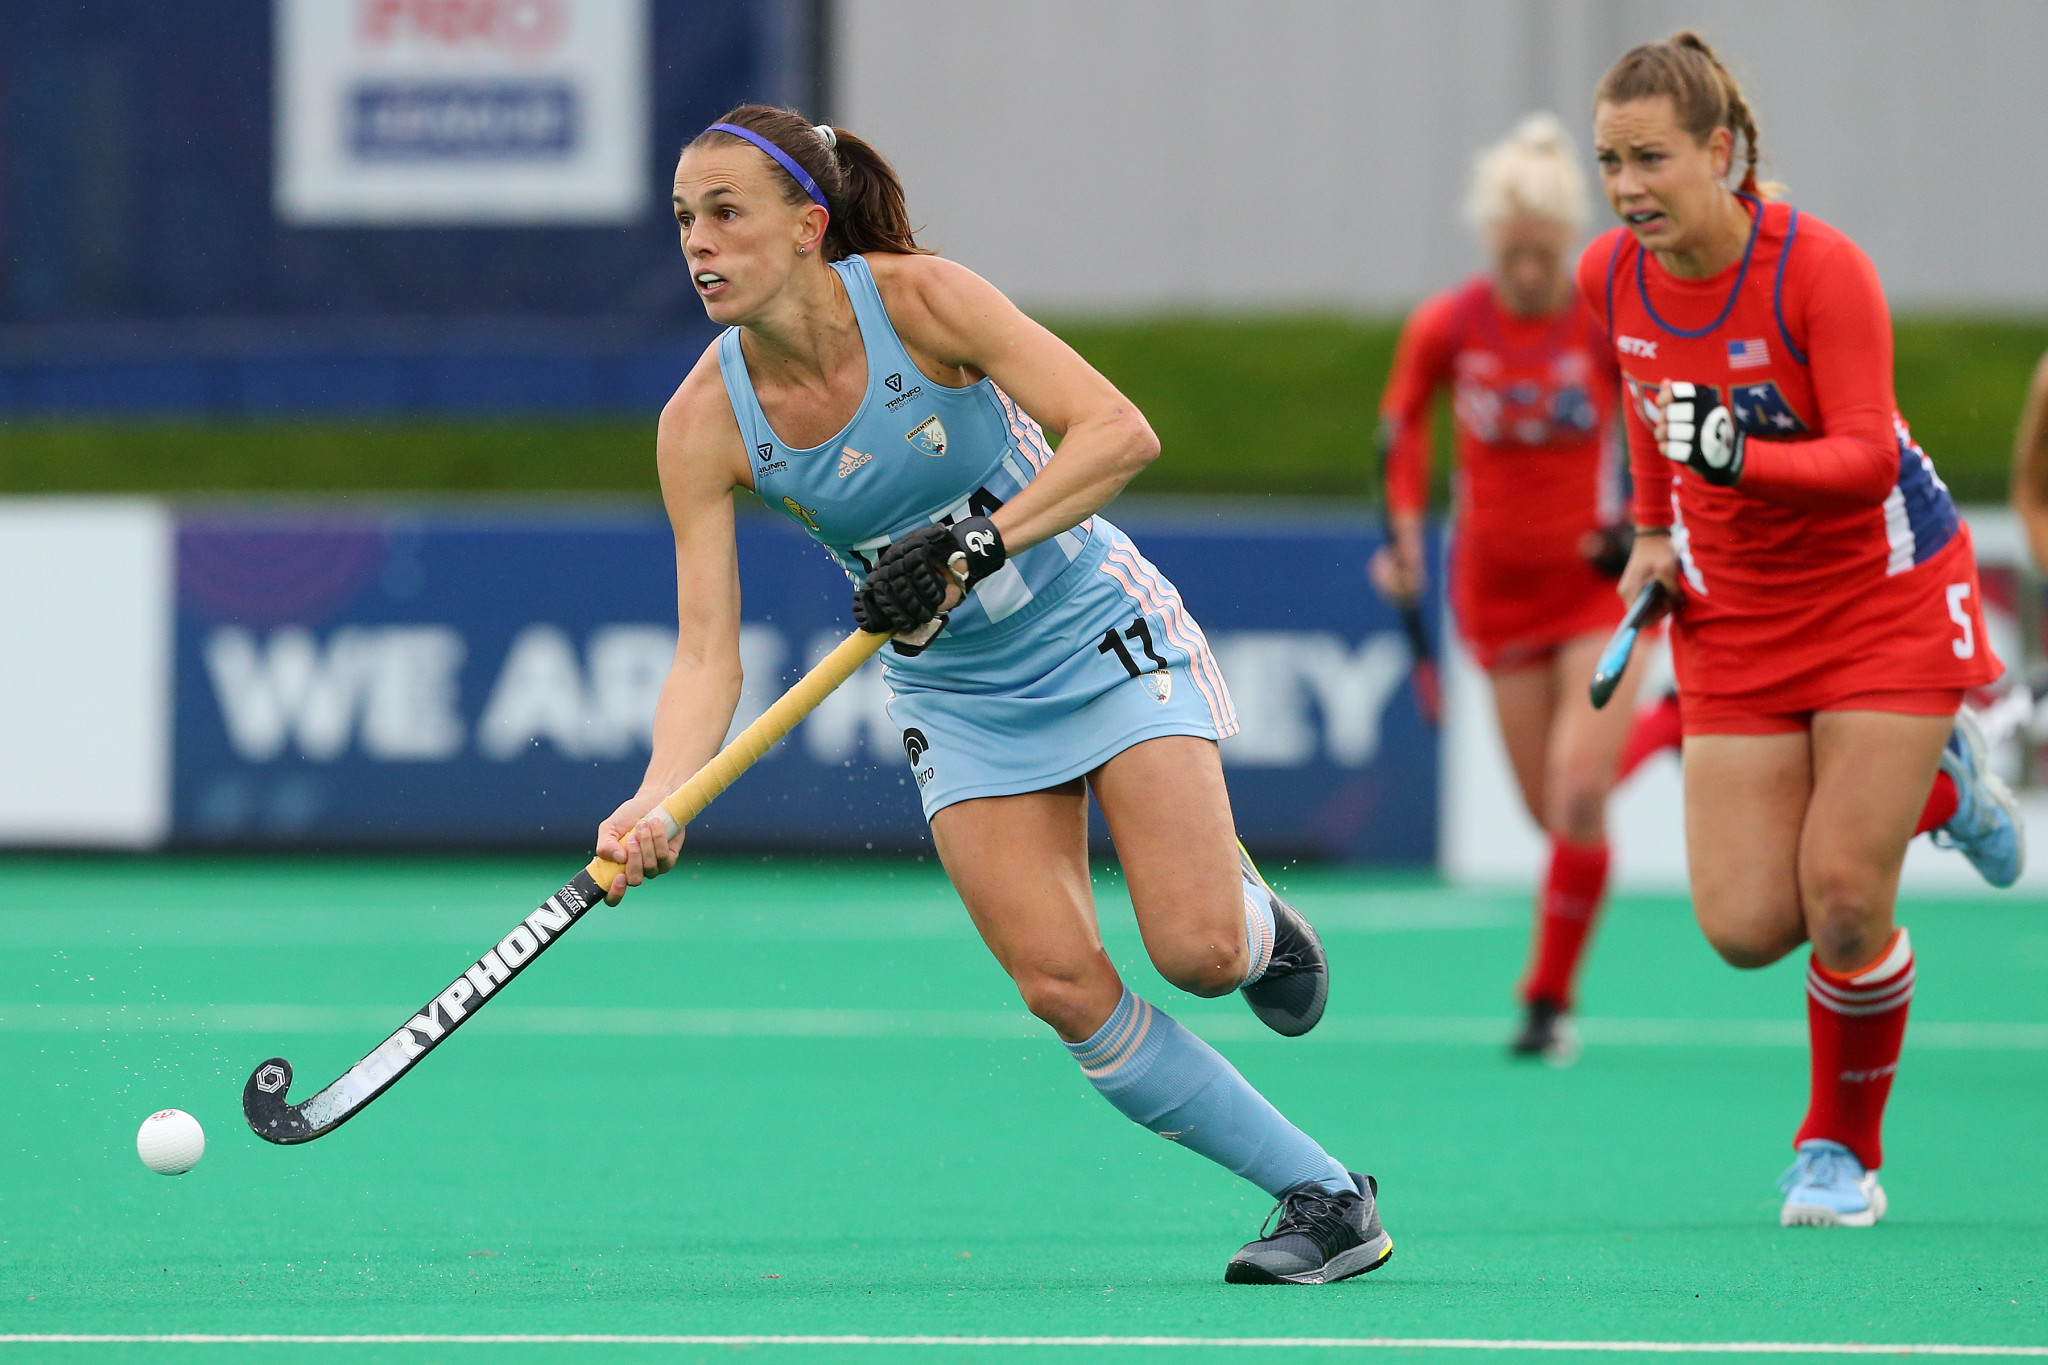 Carla Rebecchi made the top three FIH Pro League goals of the year after her effort against the United States ©Getty Images